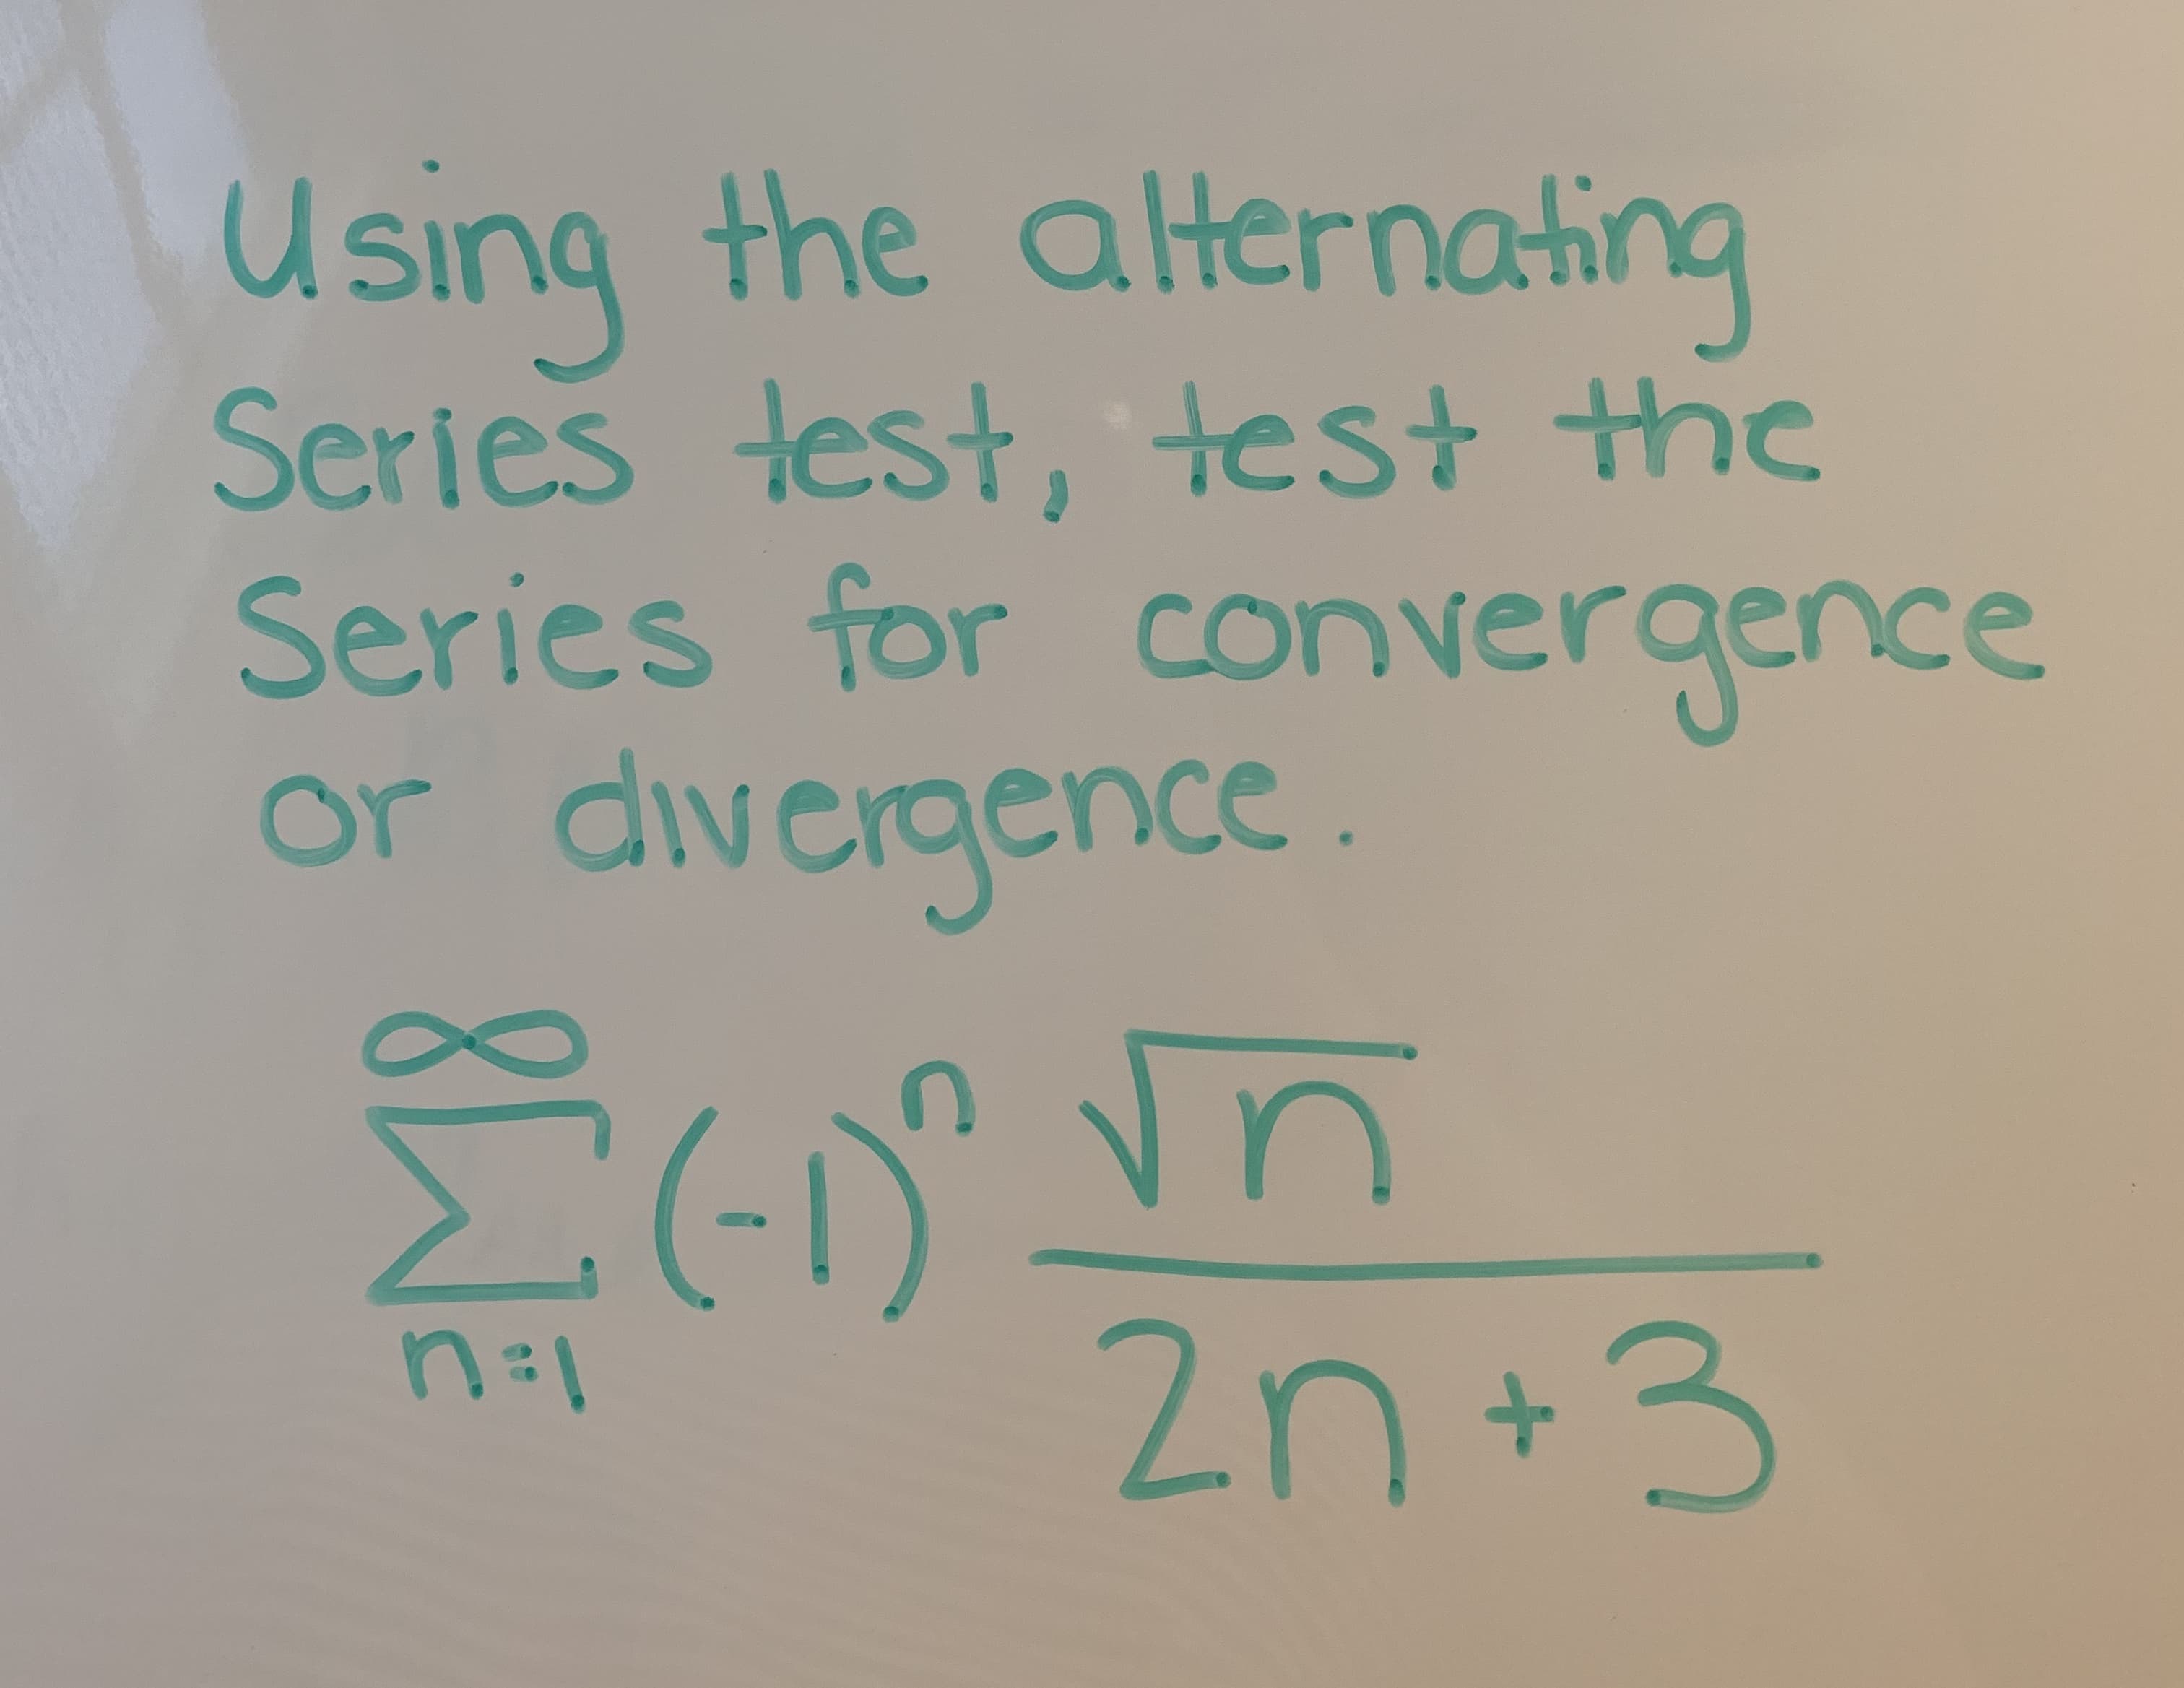 using the alHernoting
Series lest, test thc
Series for convergence
or divergence
2n+3
